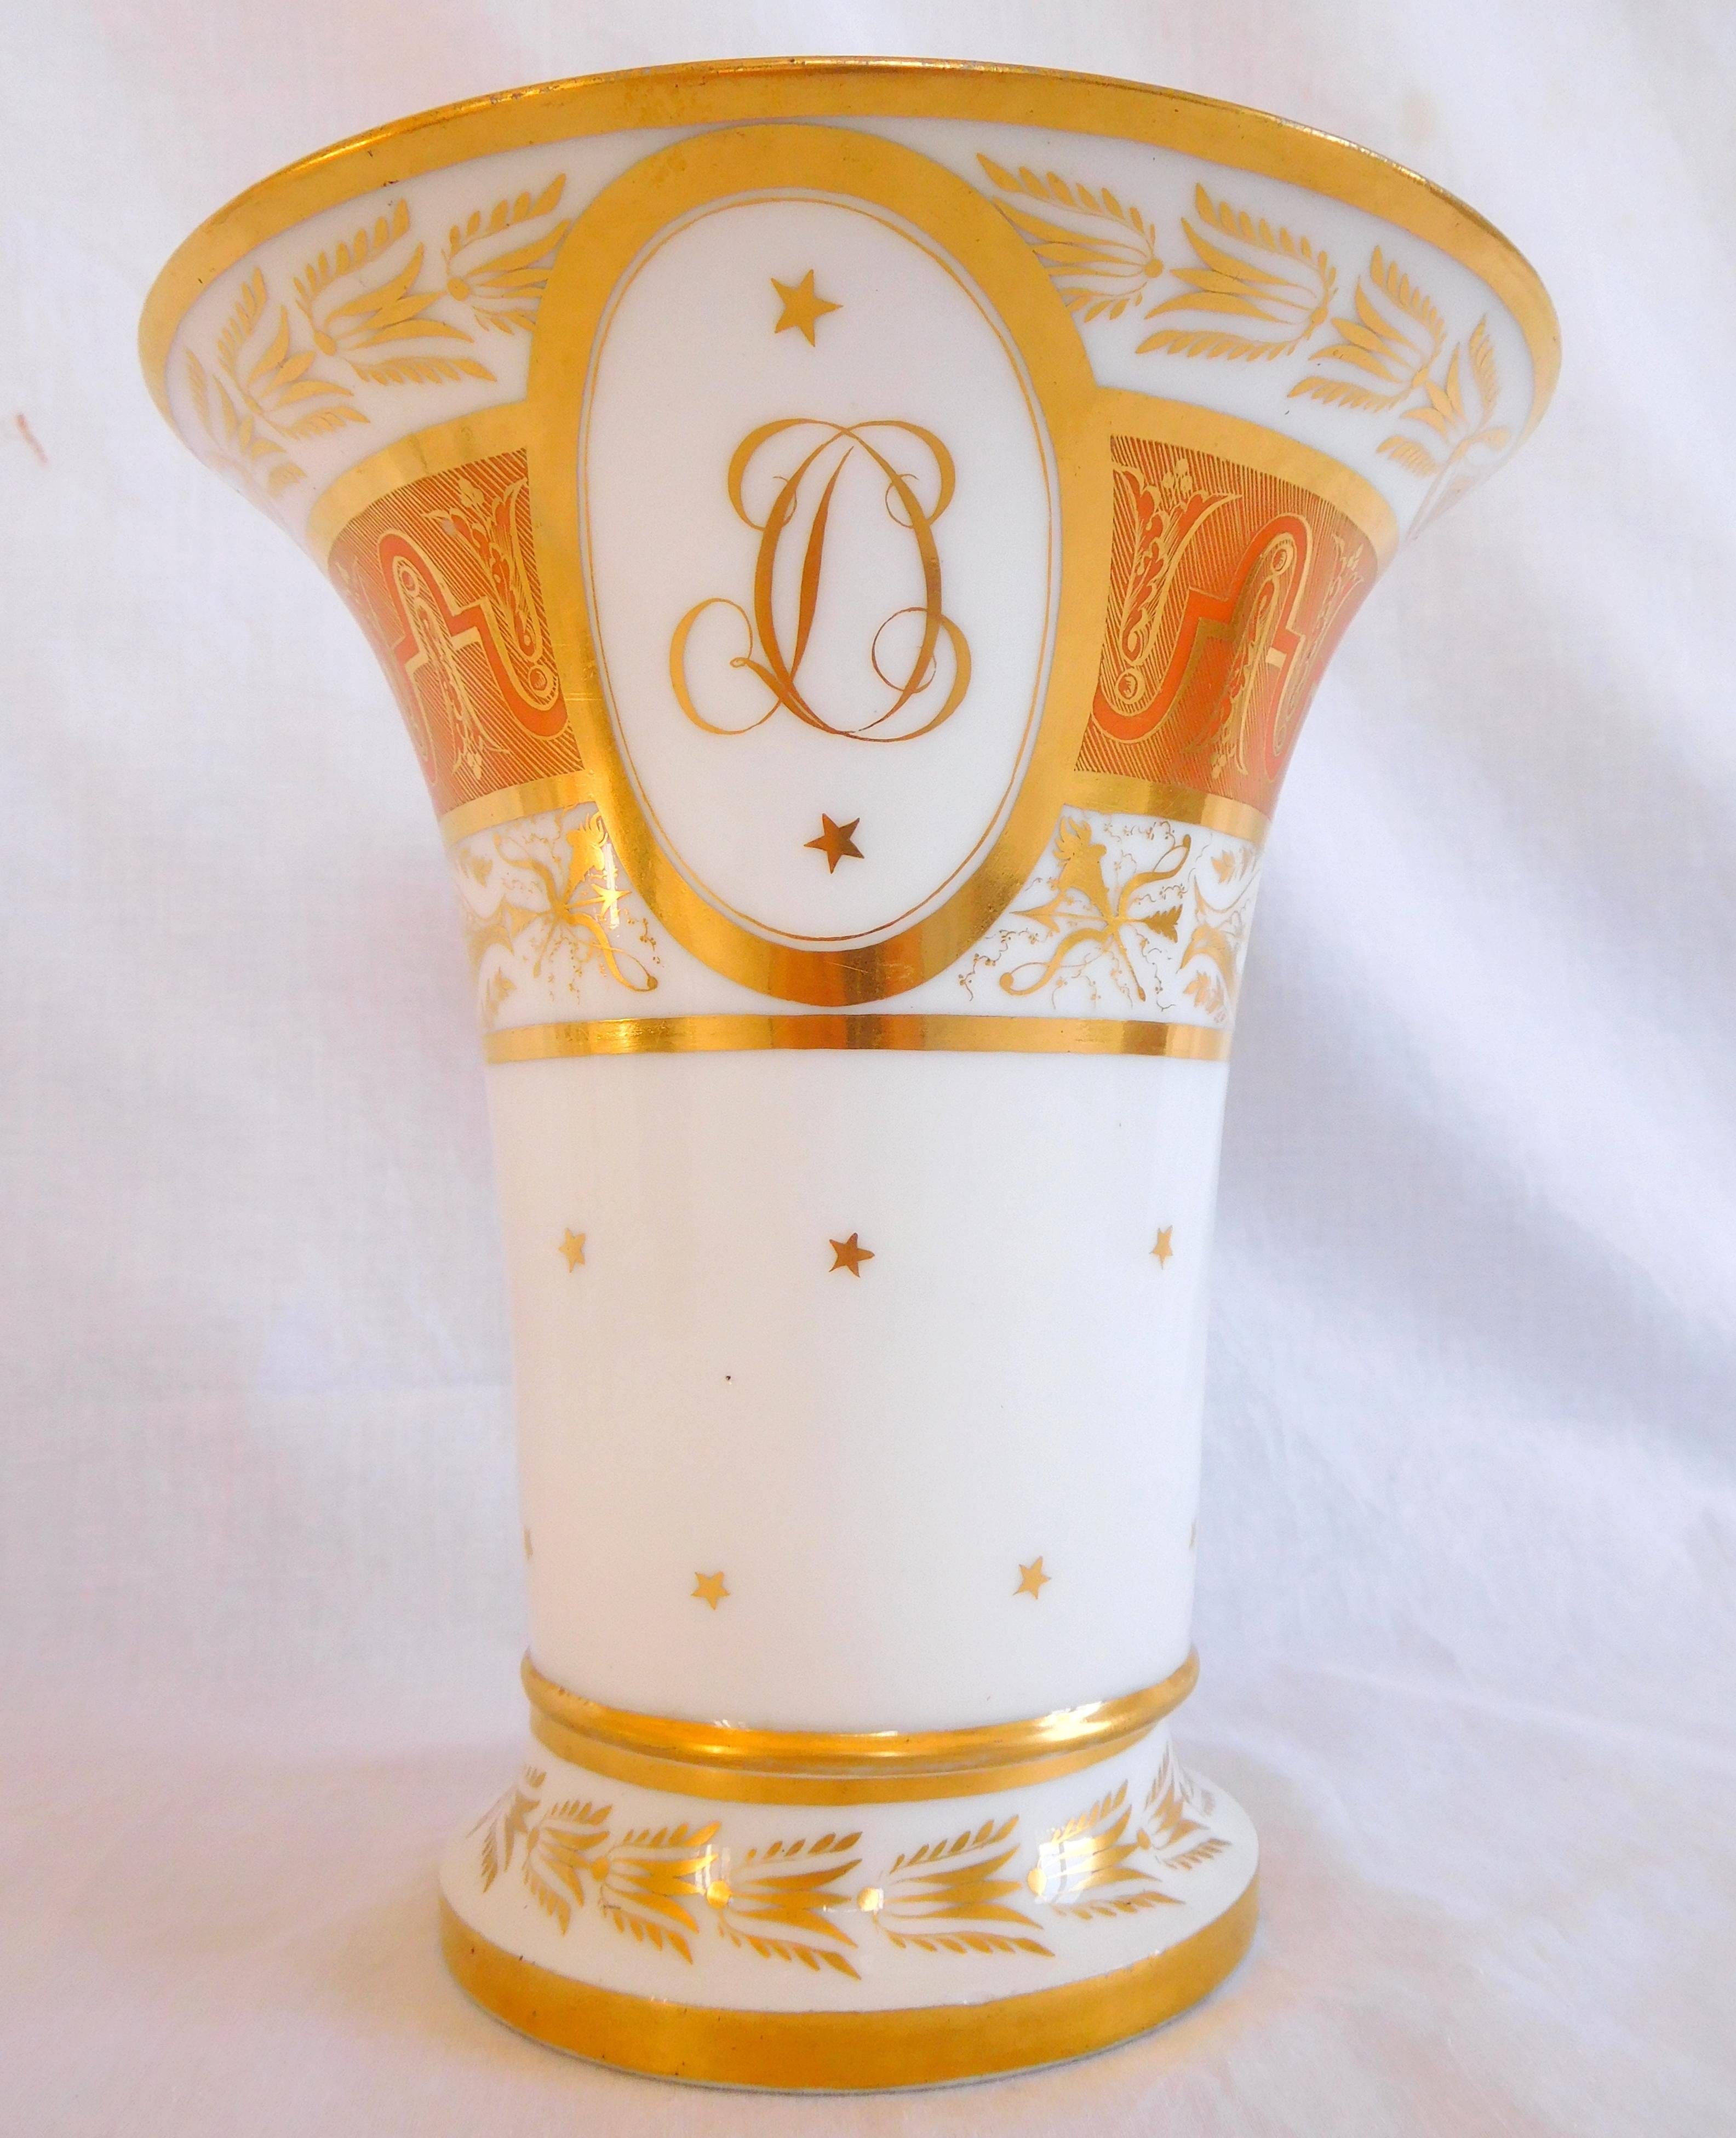 Antique French Paris porcelain vase or planter, early 19th century production, Empire period circa 1810.
Beautiful, elegant trumpet-shaped model enhanced with a refined gilt stars and palms pattern on a orangey red and white background, the alliance